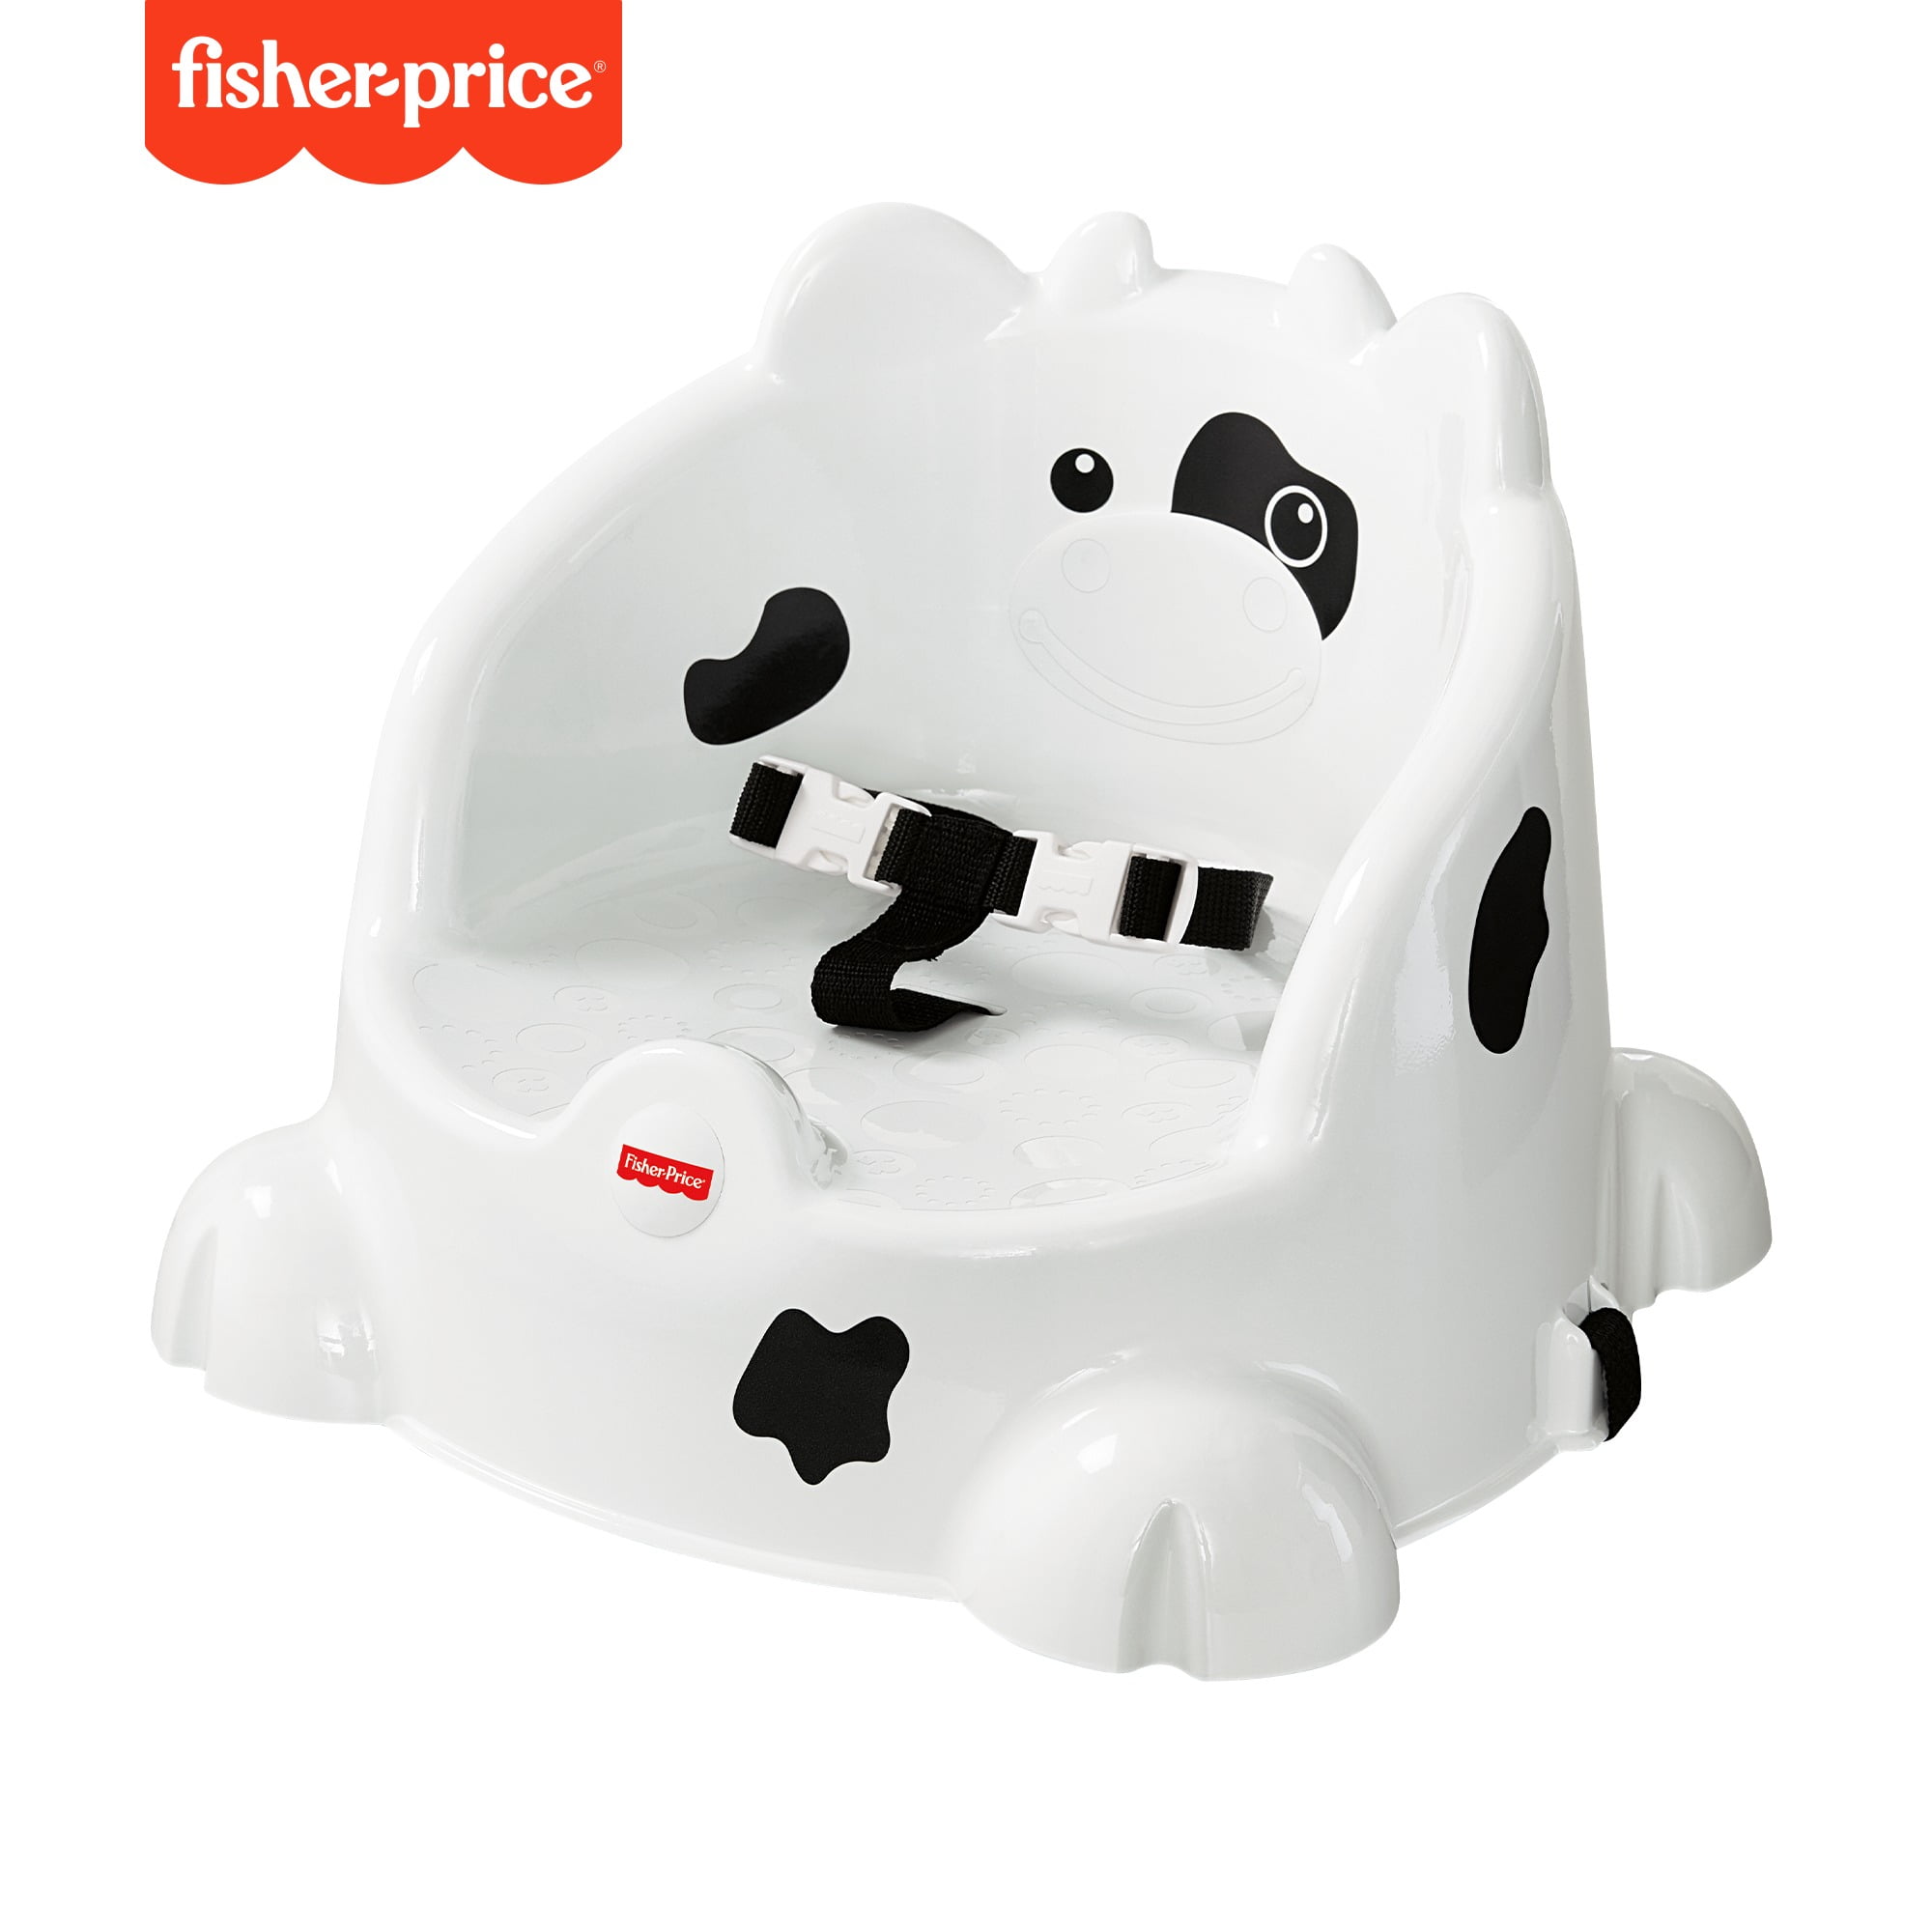 FisherPrice Booster Seat with Contoured Comfort, Cow